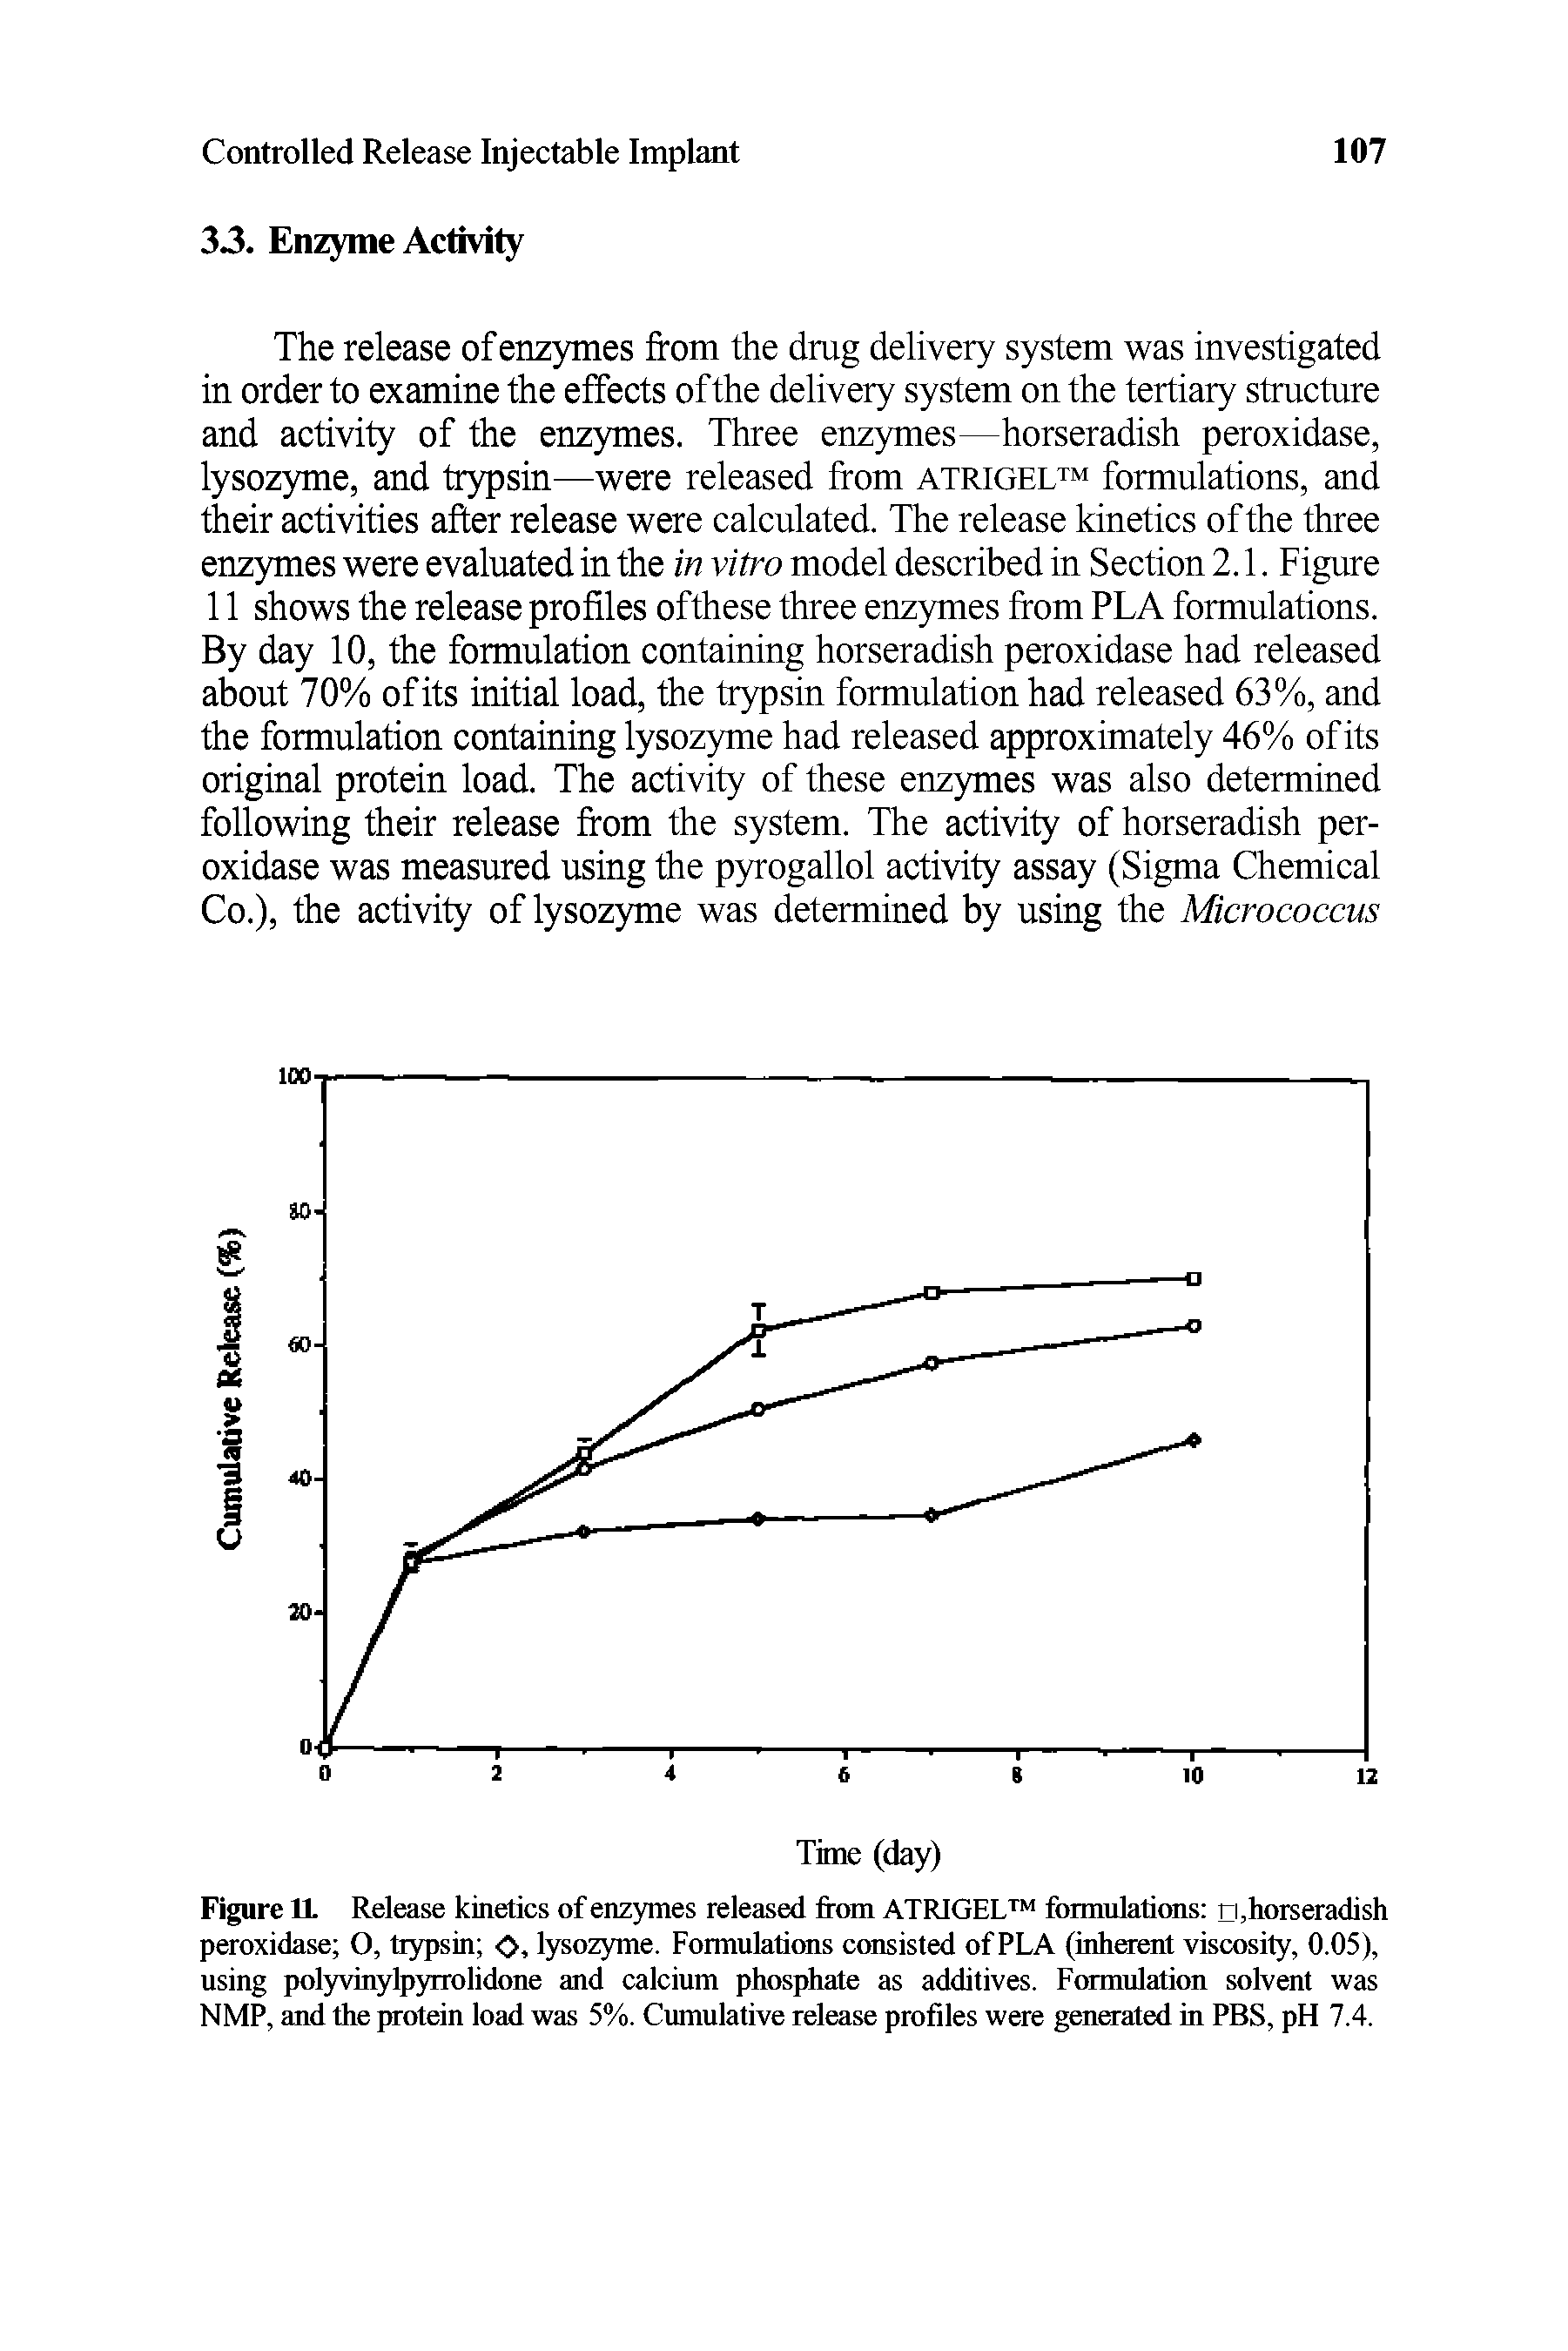 Figure 11 Release kinetics of enzymes released from ATRIGEL formulations ri.horseradish peroxidase O, trypsin O, lysozyme. Formulations consisted of PLA (inherent viscosity, 0.05), using polyvinylpyrrolidone and calcium phosphate as additives. Formulation solvent was NMP, and the protein load was 5%. Cumulative release profiles were generated in PBS, pH 7.4.